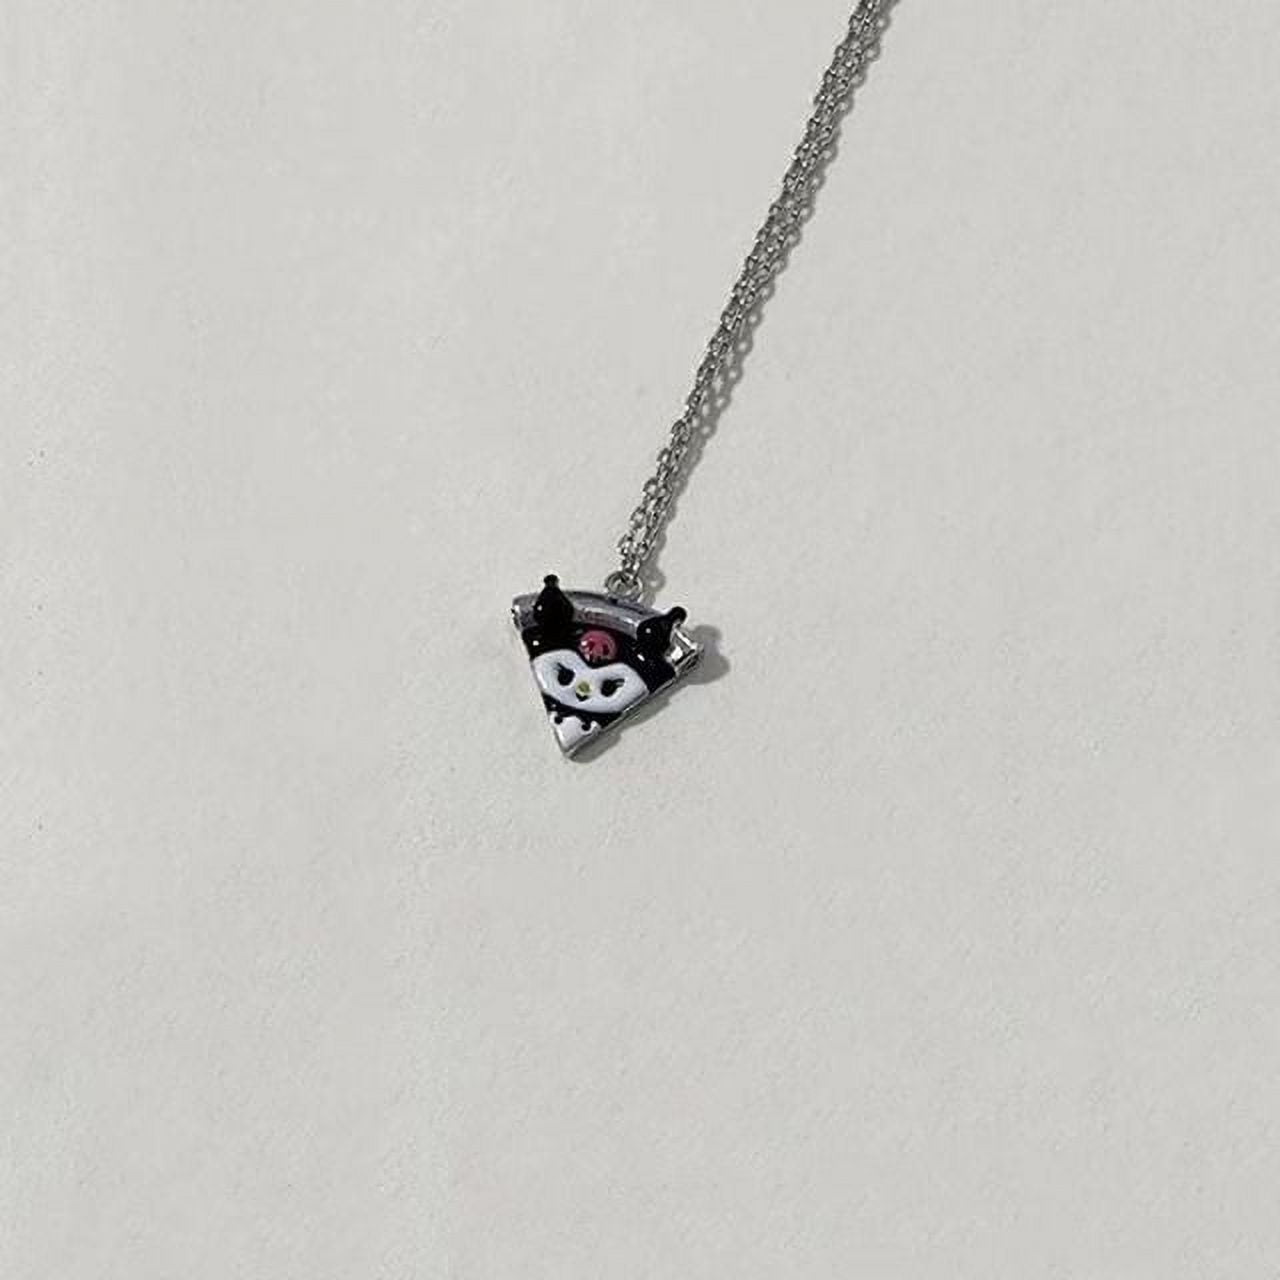 New Sanrio Hello Kitty Kuromi My Melody Necklace Cute Pendant Magnetic Sister Necklace Cartoon Fashion Jewelry Friend Gift 1c671e69 5235 4e3c 8f84 7831cfe52577.72d344307254232714faf7b160285749